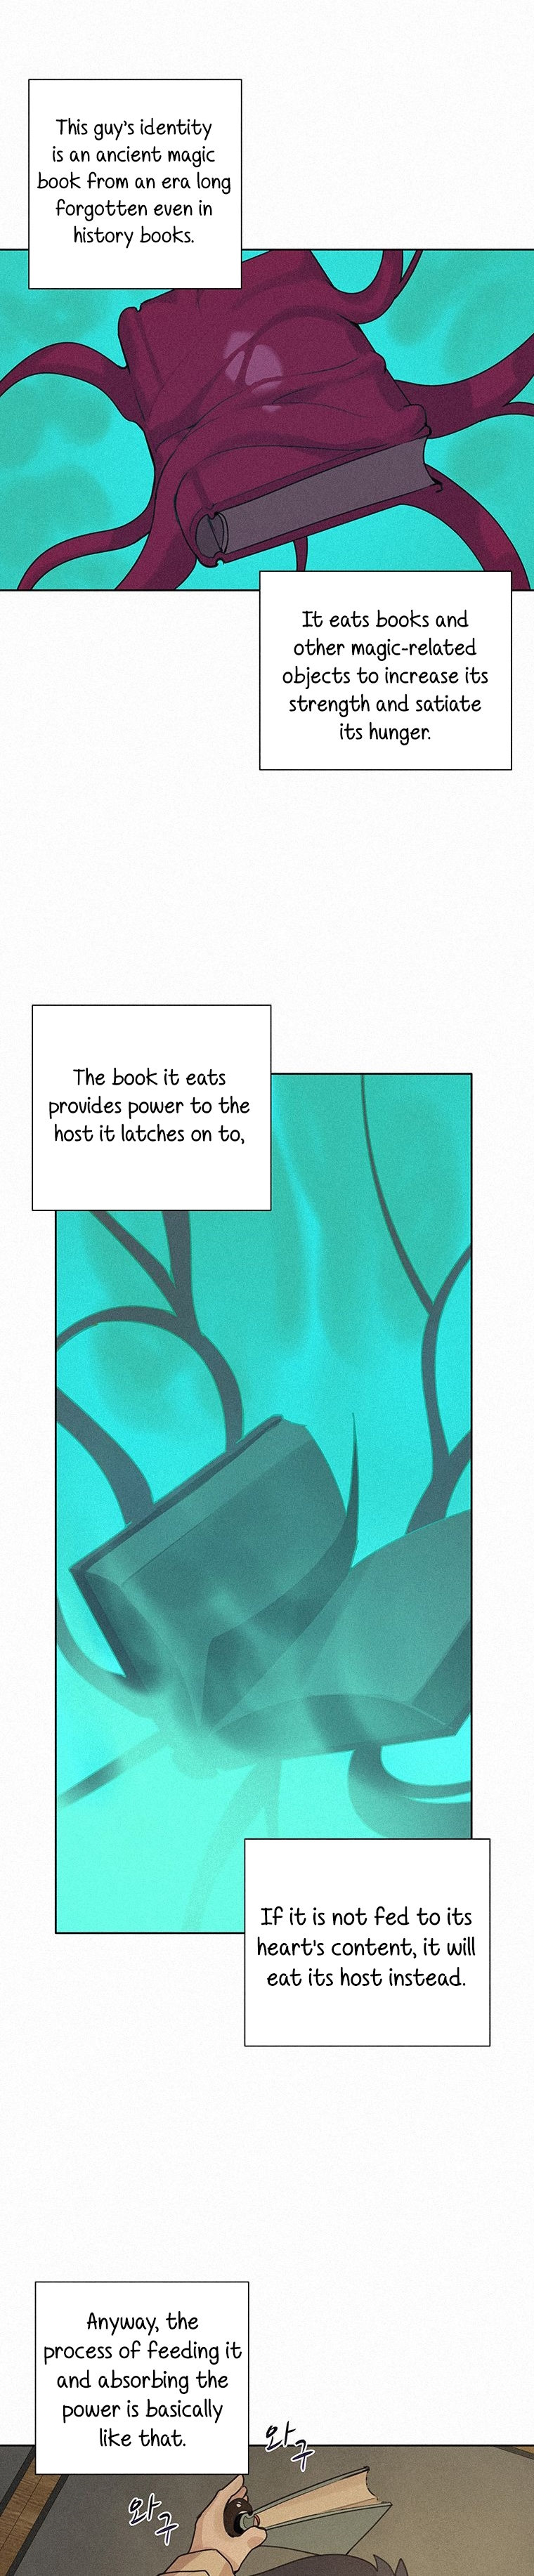 The Book Eating Magician - Chapter 2 Page 15